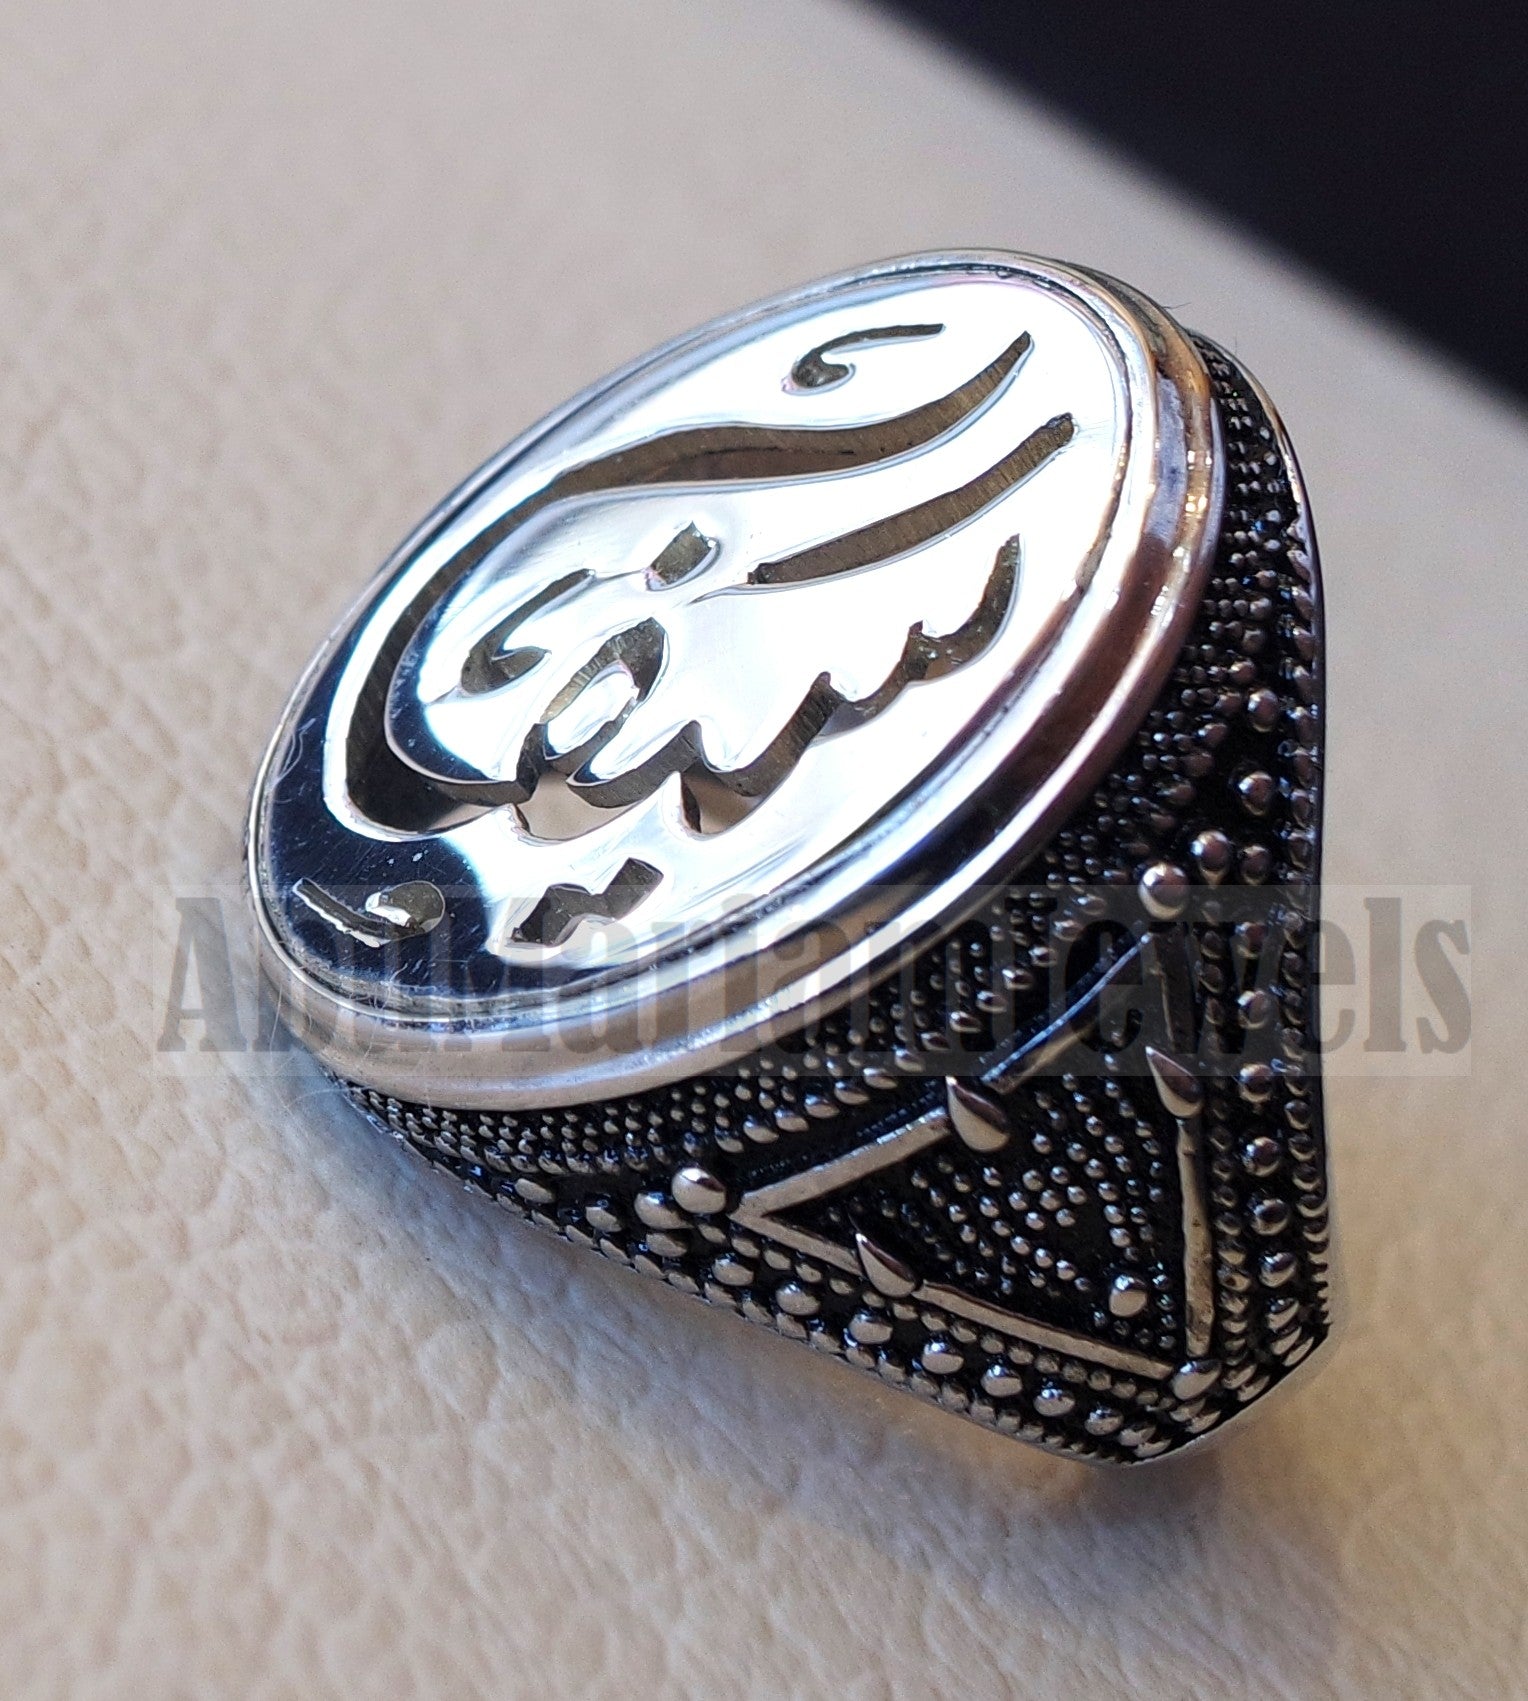 Customized Arabic calligraphy names handmade ring personalized antique jewelry style sterling silver 925 any size TSN1009 خاتم اسم تفصيل